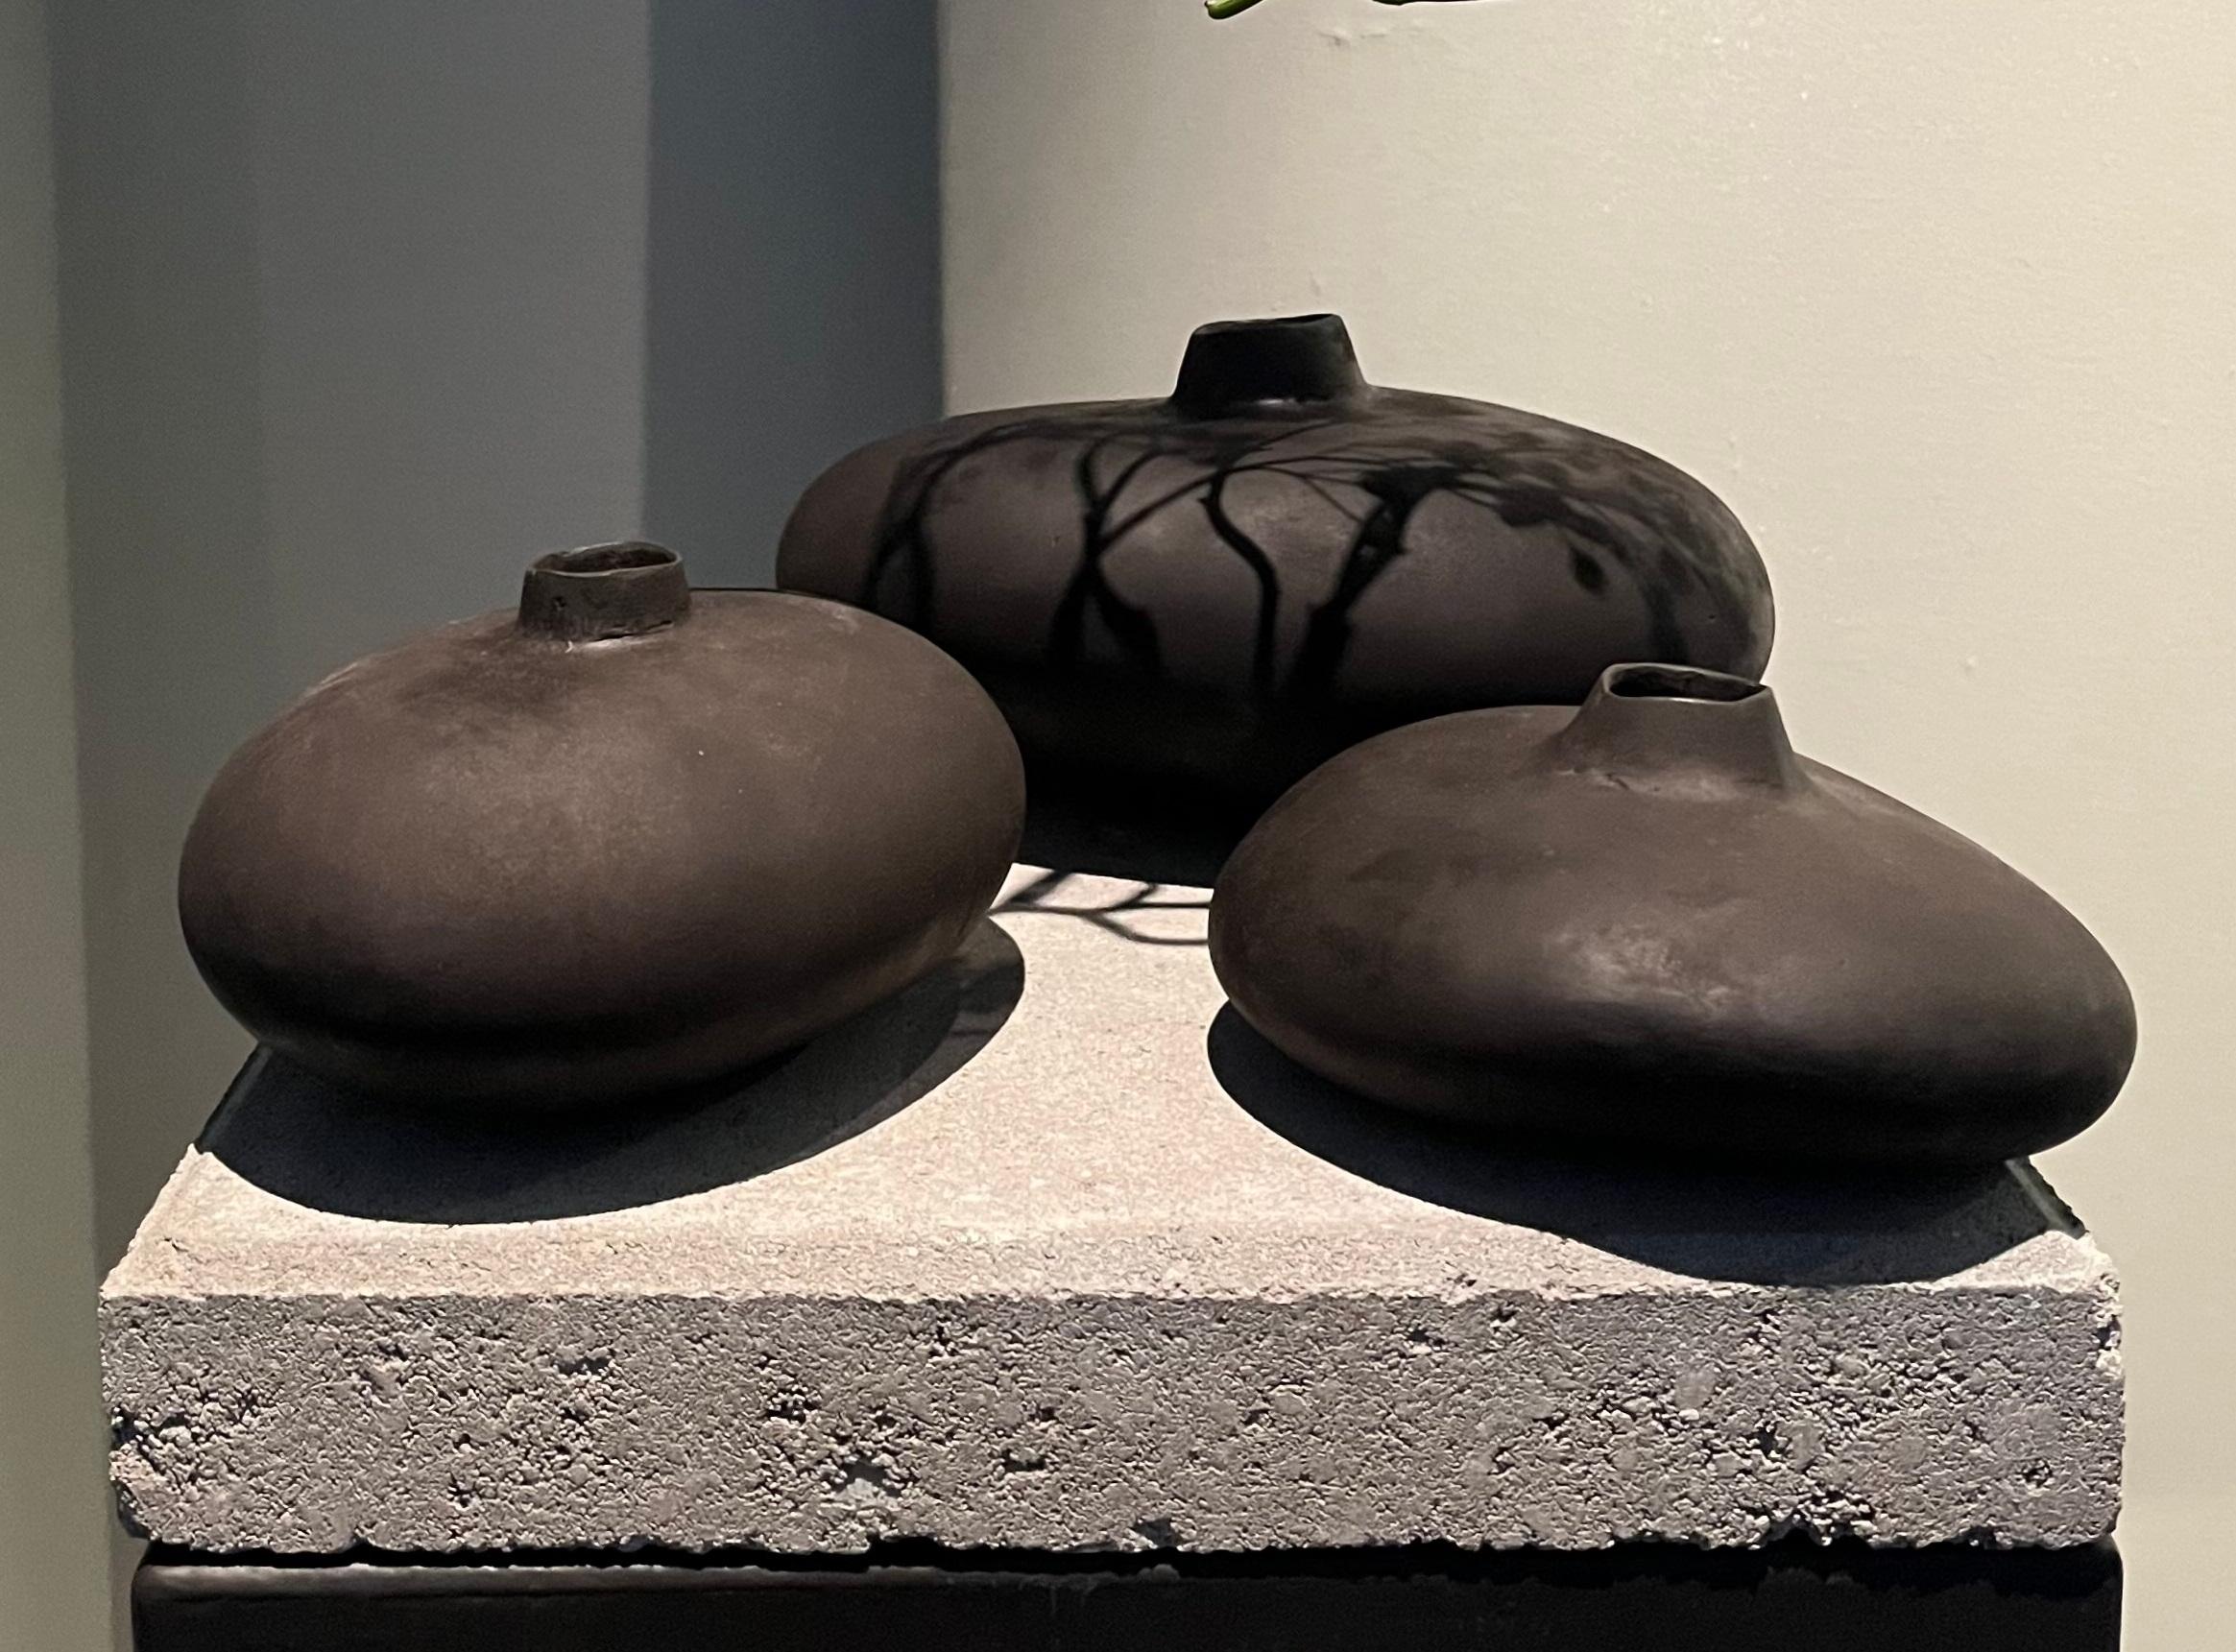 Set Of 3 Patinated Bronze Object 01 by Herma de Wit
Limited Edition of 30 + 3AP pieces.
Dimensions: Small: D 9 x W 17 x H 15 cm.
Medium: D 11 x W 18 x H 14 cm.
Large: D 12 x W 23 x H 16 cm.
Materials: Patinated bronze.

Nature, a boundless source of